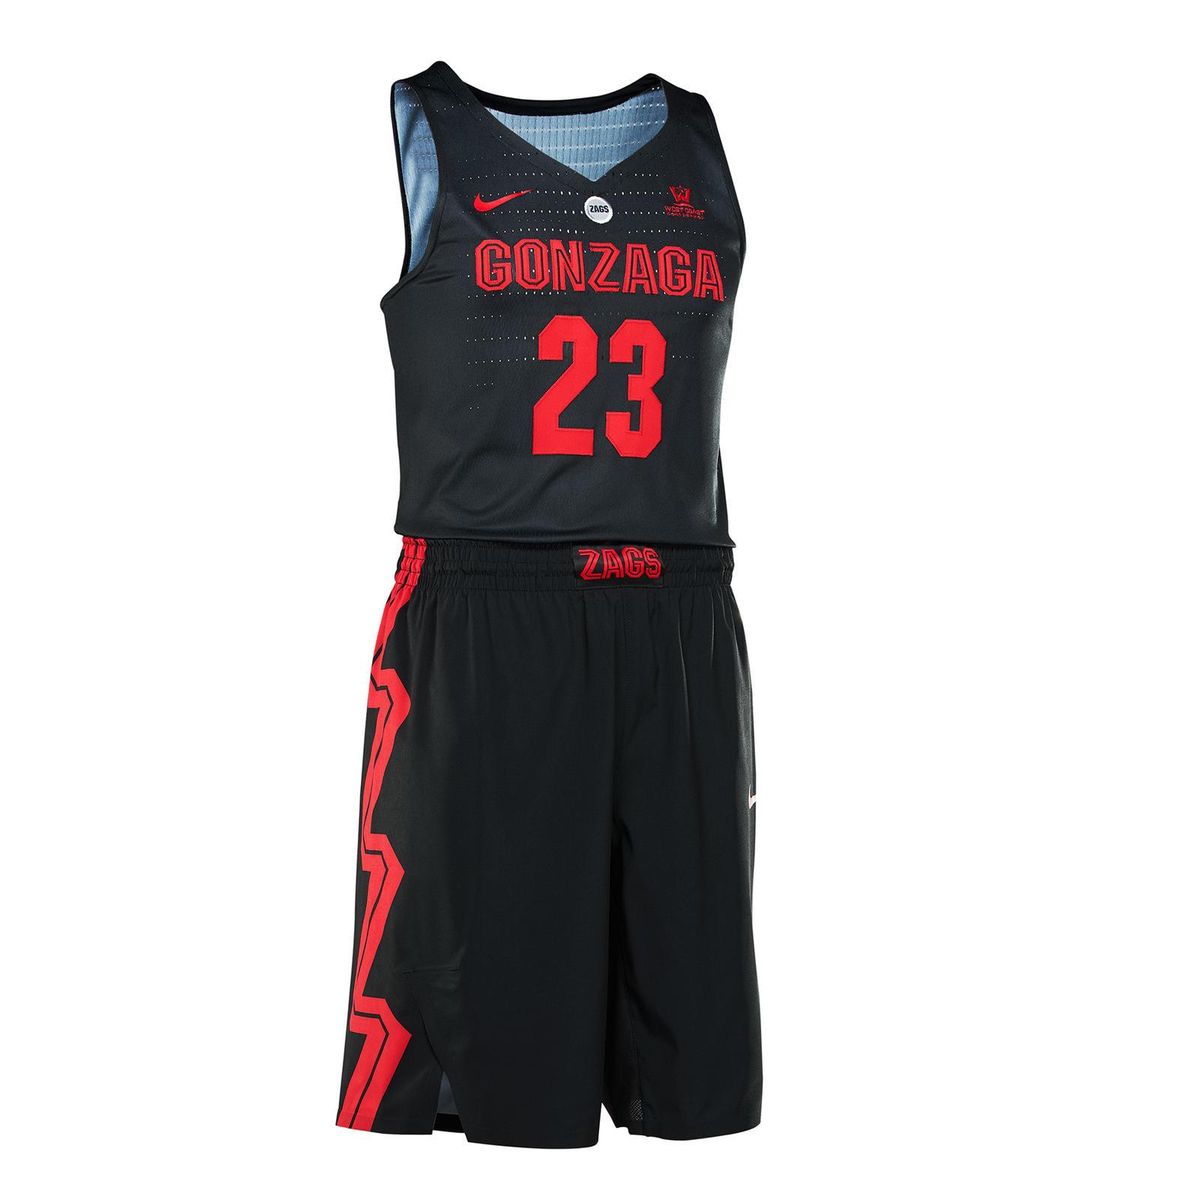 Gonzaga’s PK80 uniform features a unique a zig-zag pattern that runs down the right side of the uniform, with an oversized Bulldog logo on the left leg. (Nike)